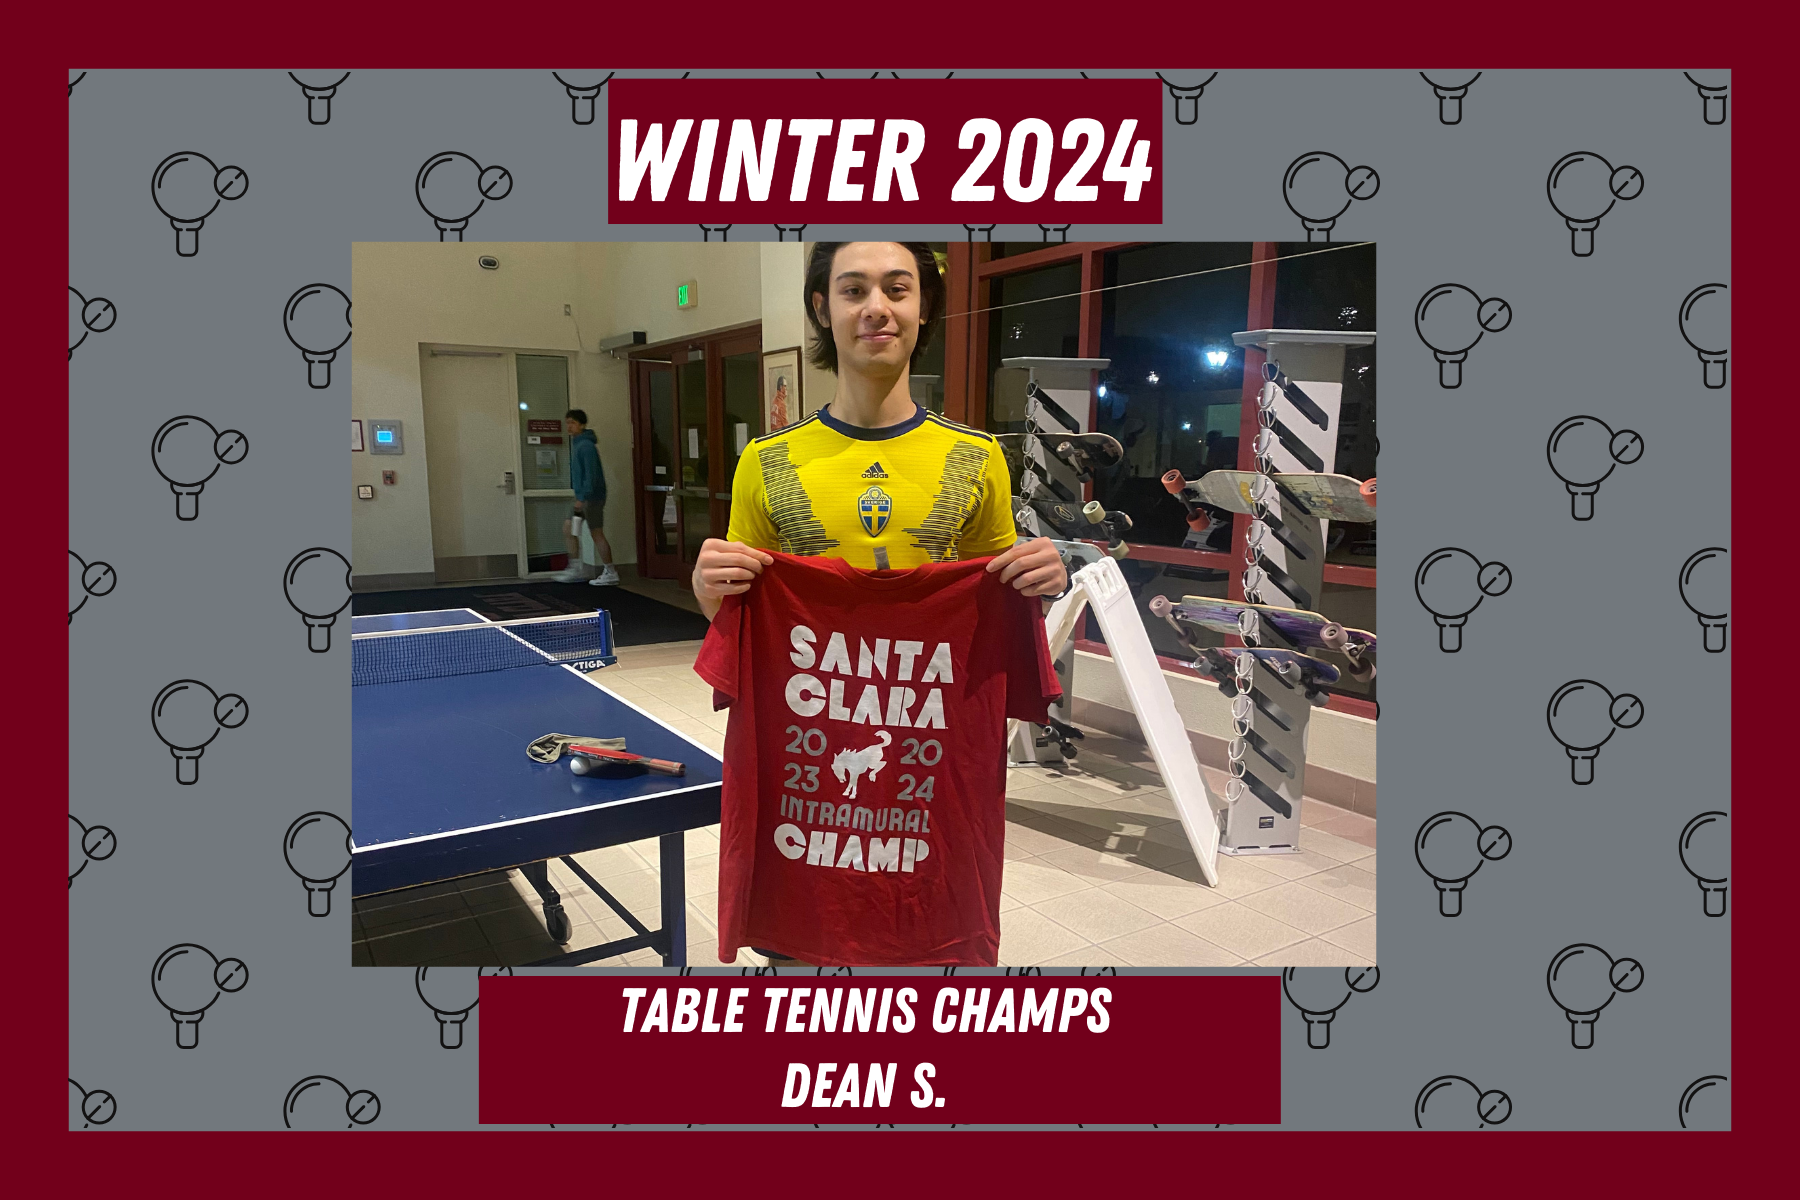 Photo of Table Tennis league champion, Dean S., posing with his intramural champion t shirt in the Malley Center lobby.